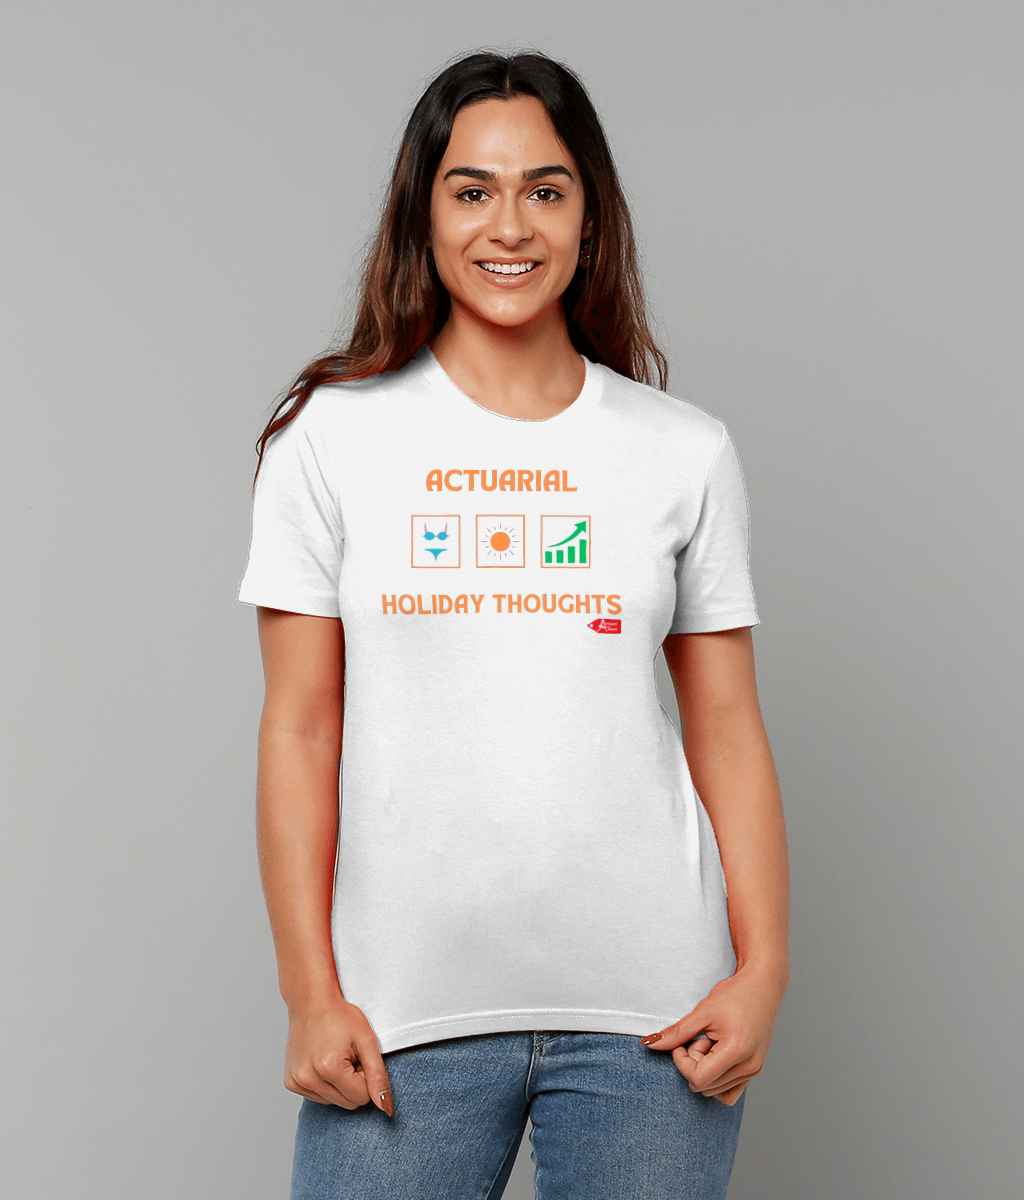 Actuarial Holiday Thoughts White T-shirt